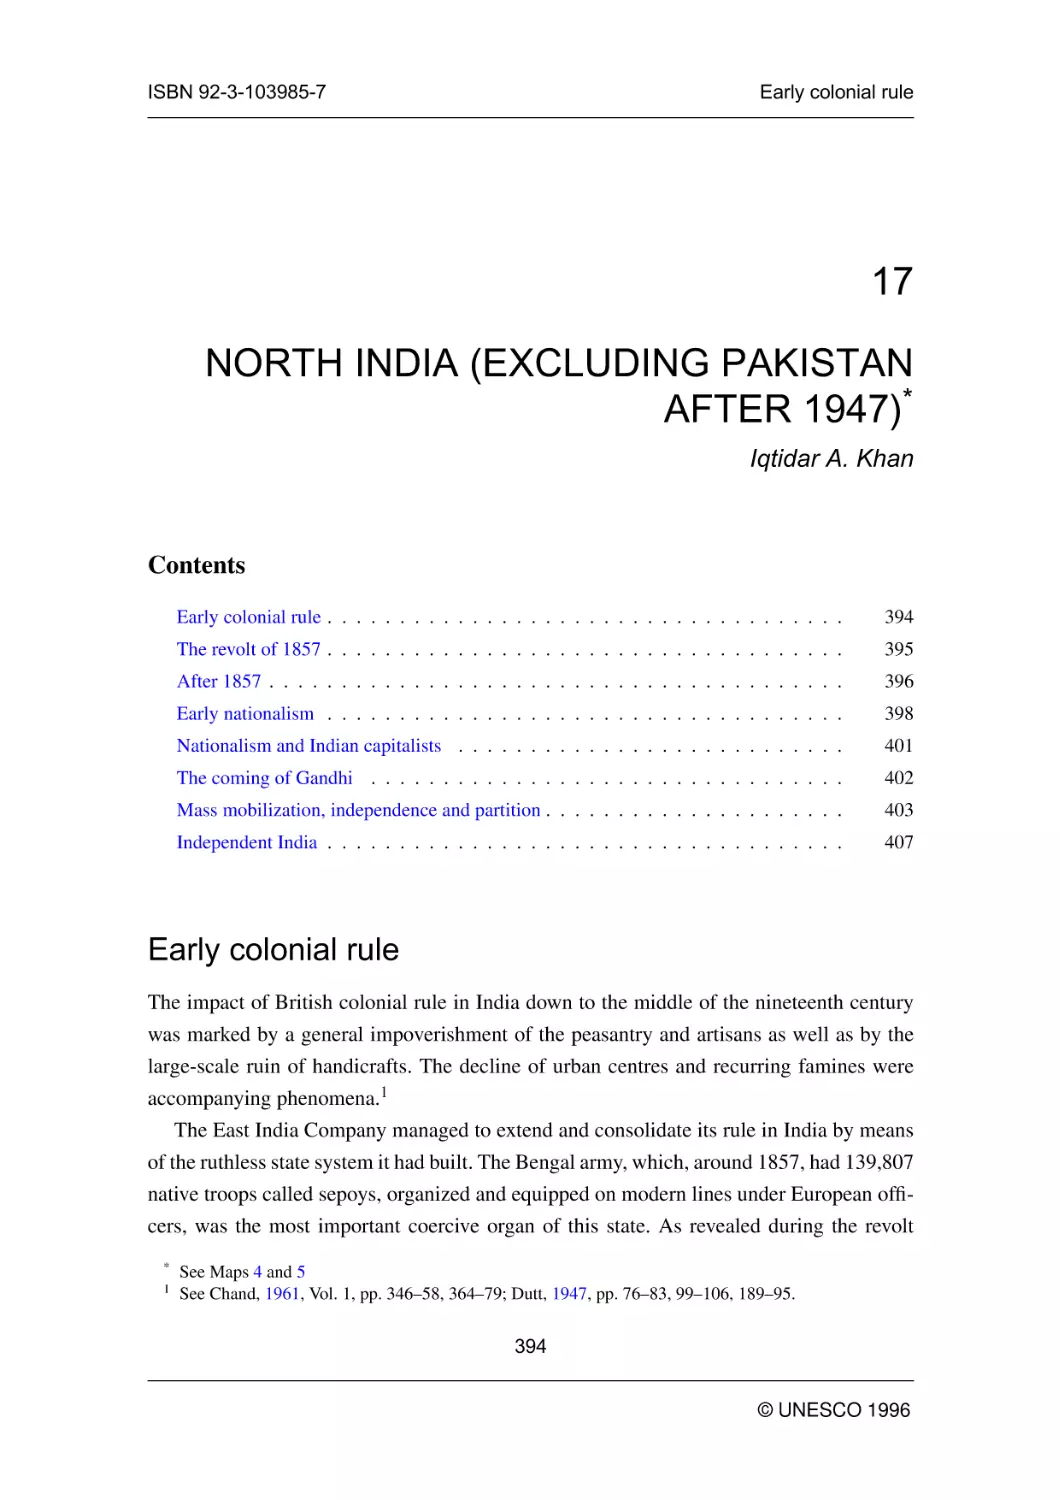 NORTH INDIA (EXCLUDING PAKISTAN AFTER 1947)